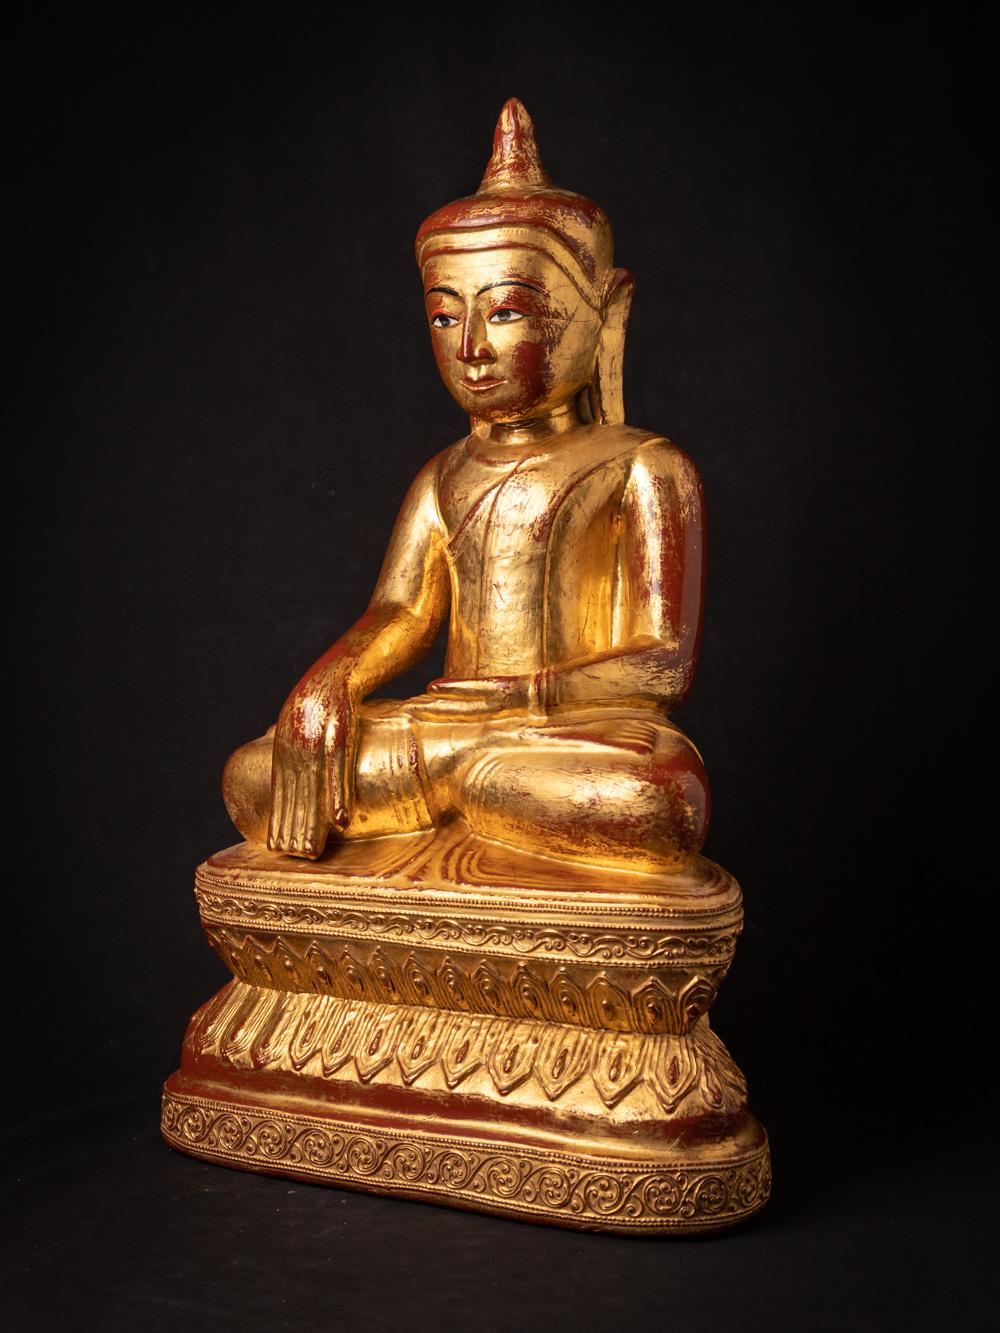 The antique wooden Burmese Buddha statue is a remarkable and historically significant artifact originating from Burma. Crafted from wood, this statue stands at an impressive 64 cm in height and measures 39.5 cm in width and 24 cm in depth. Adorned